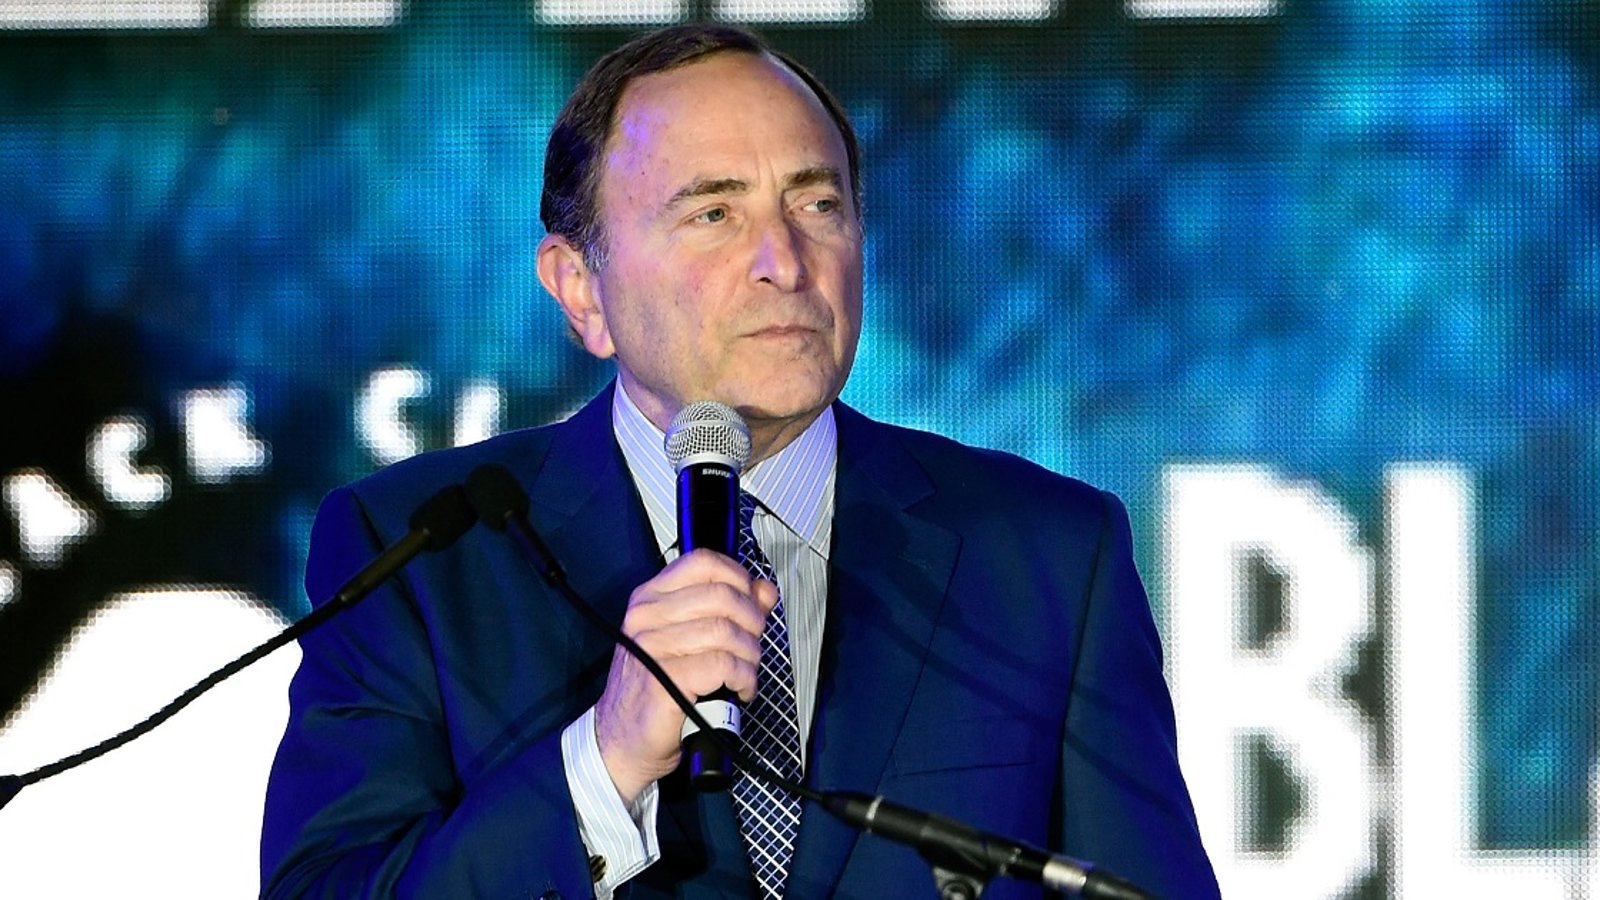 Breaking: NHL and NHL players make a massive donation to Houston relief effort.